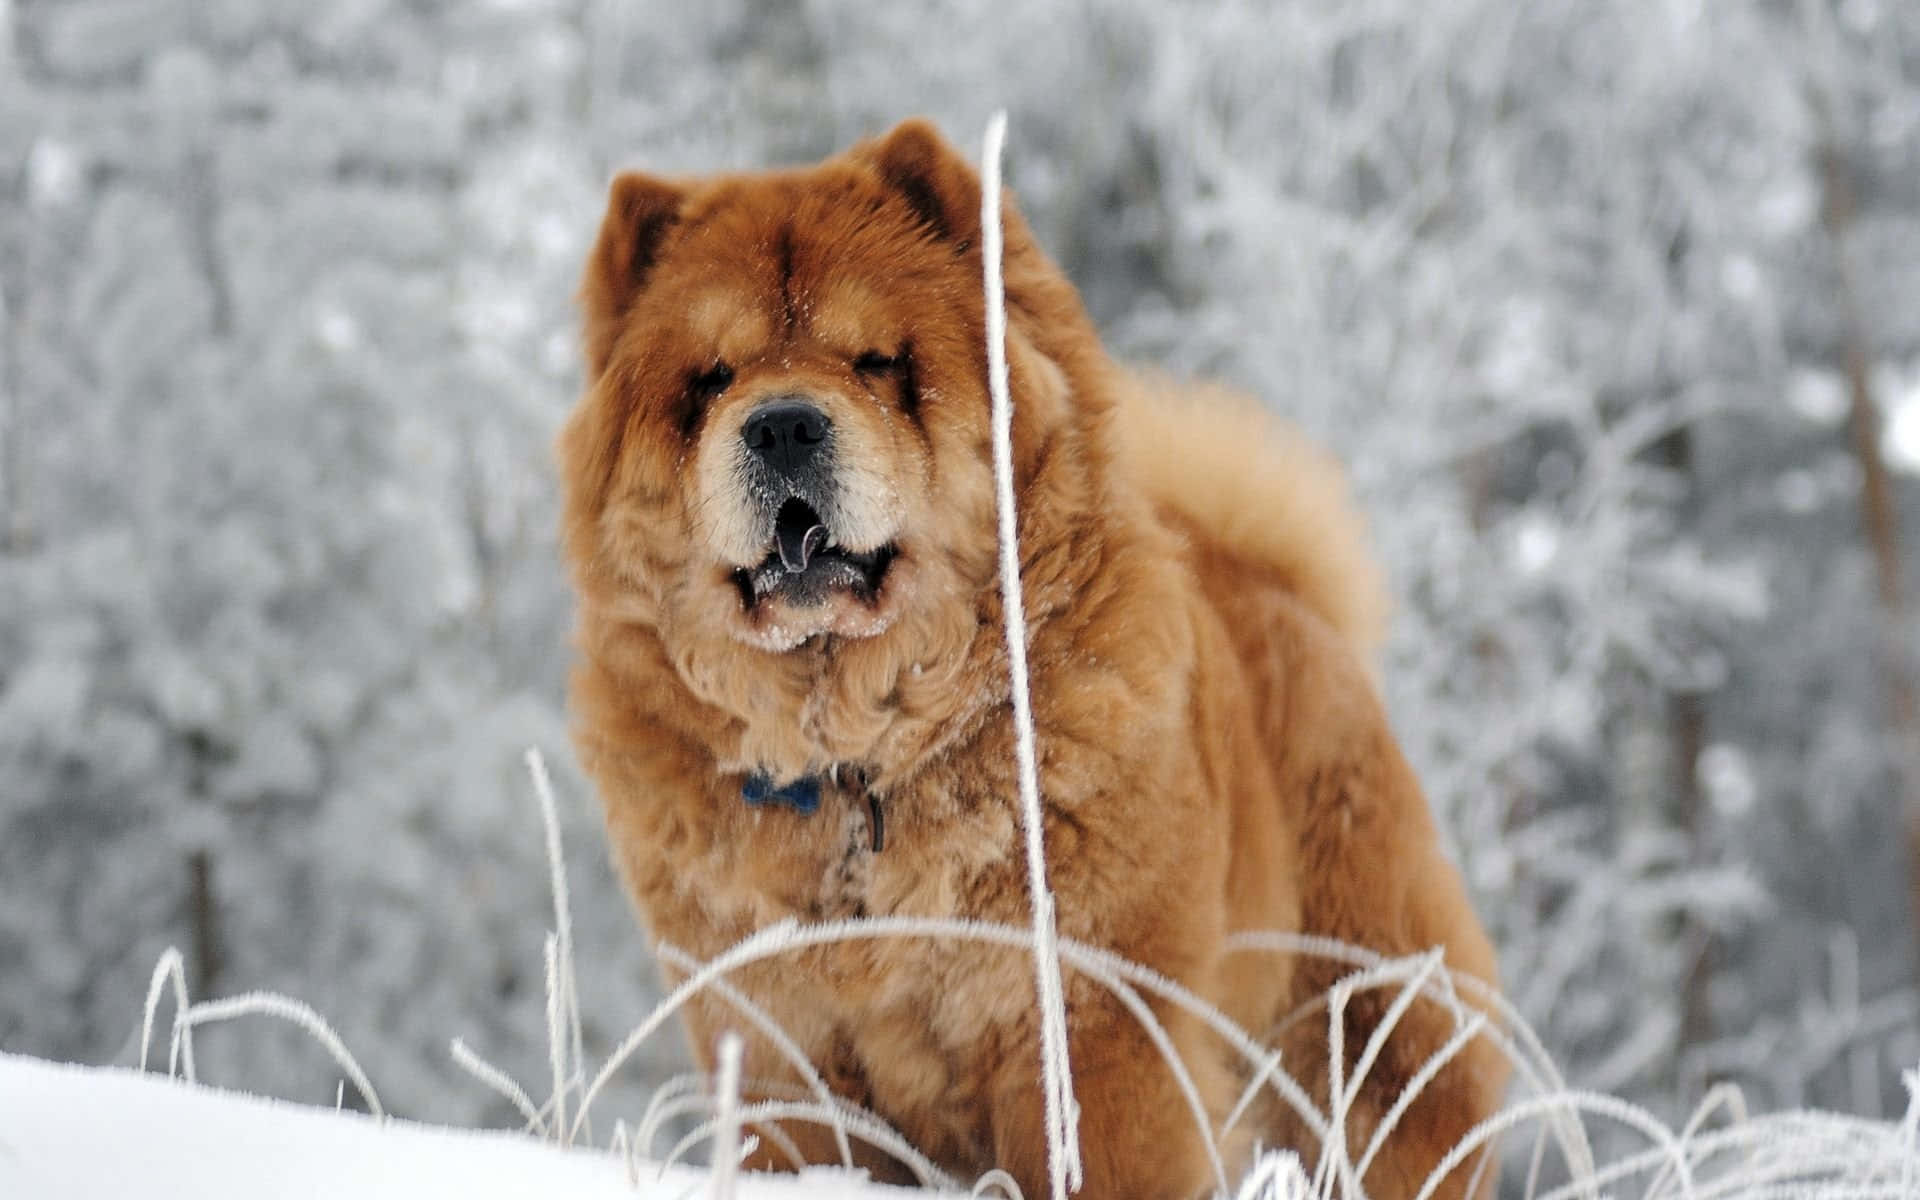 Fun loving Chow Chow with floppy ears